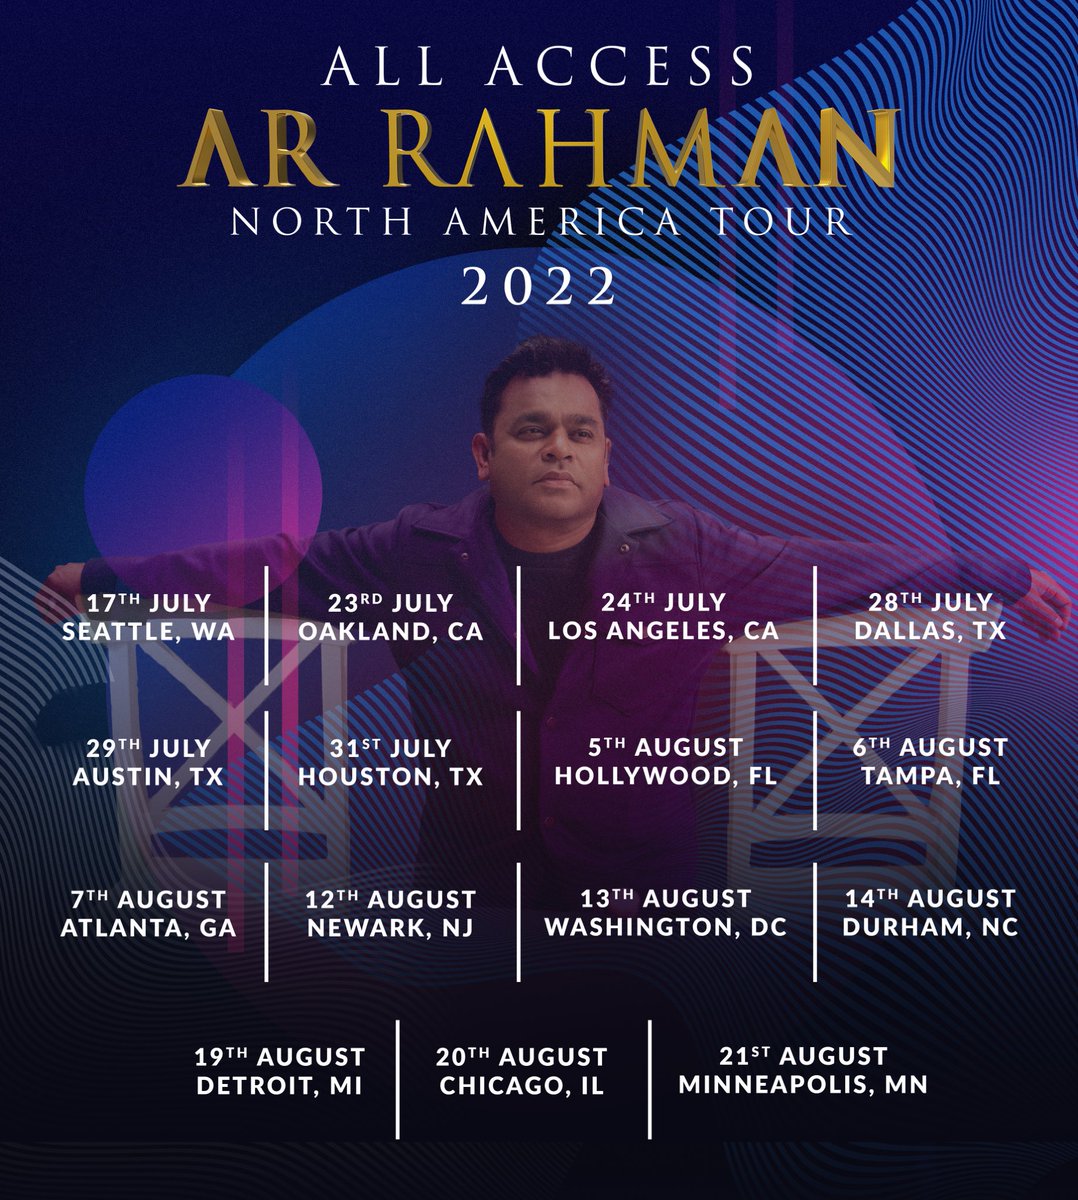 I can't wait to bring our show back to North America this summer!  Which city will we see you in?

#arrahman #arrahmanlive #allaccessarrahman #northamericatour #healingworld #EPI